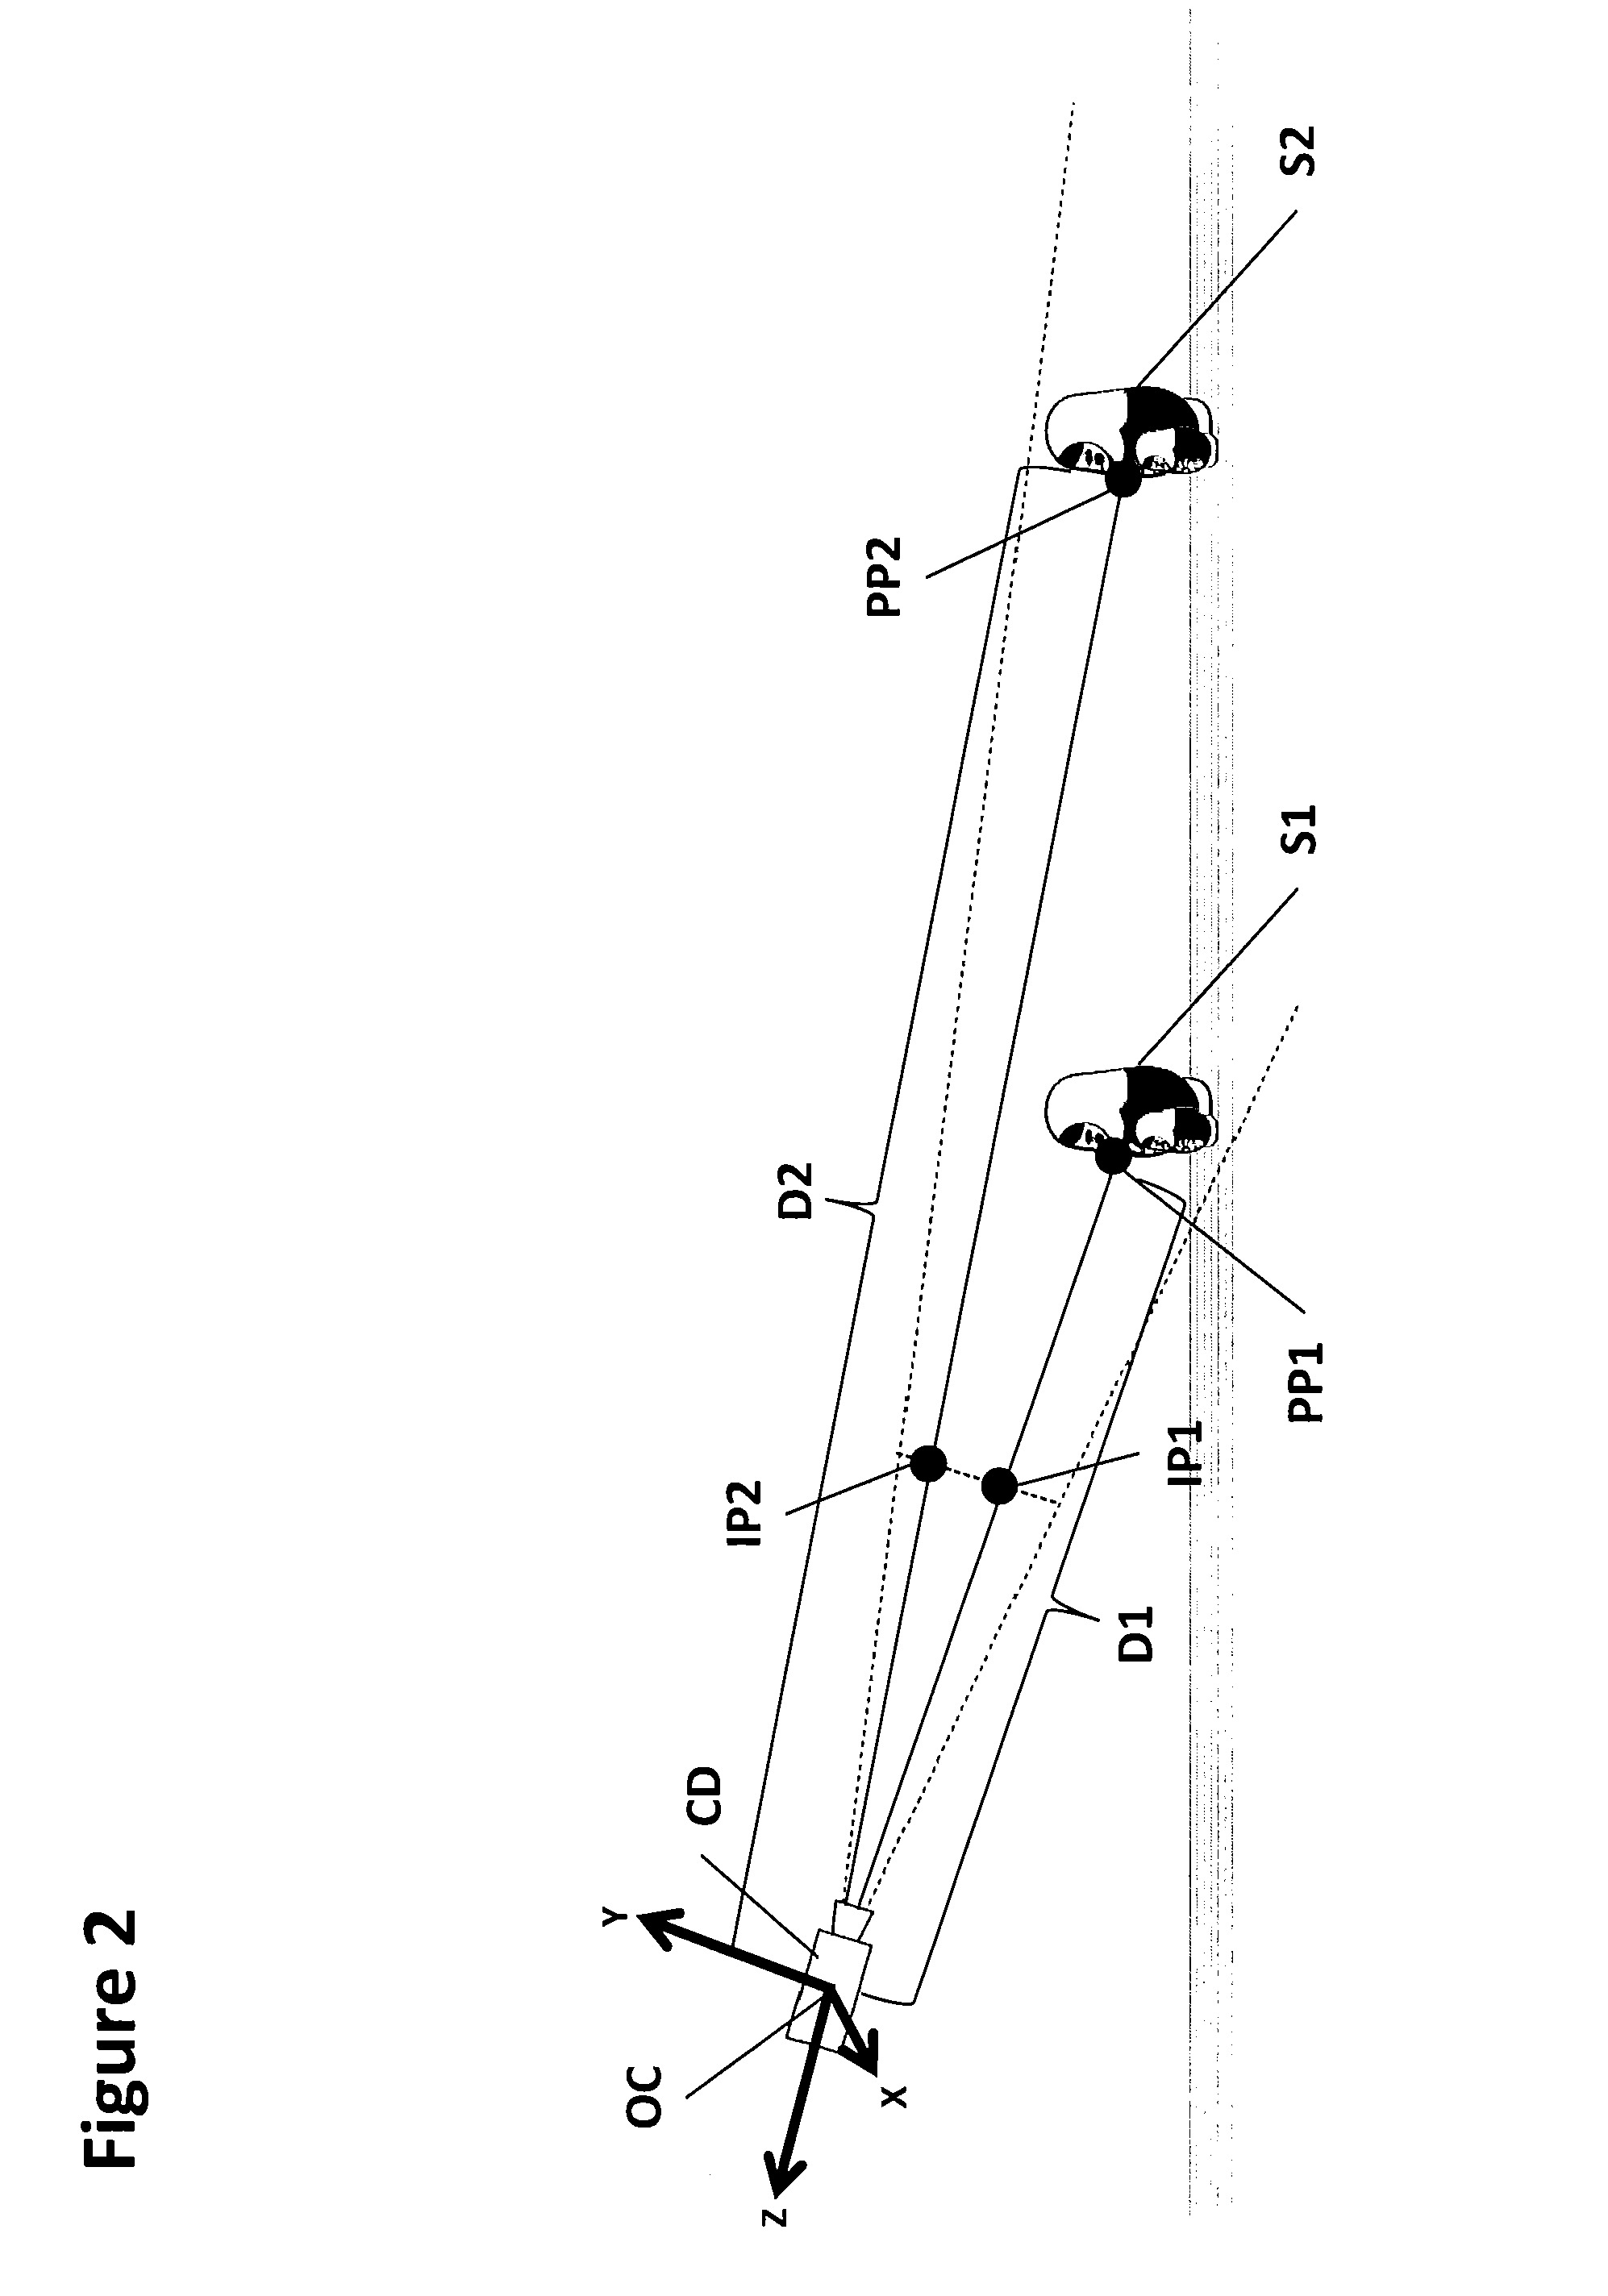 Method of detecting and describing features from an intensity image